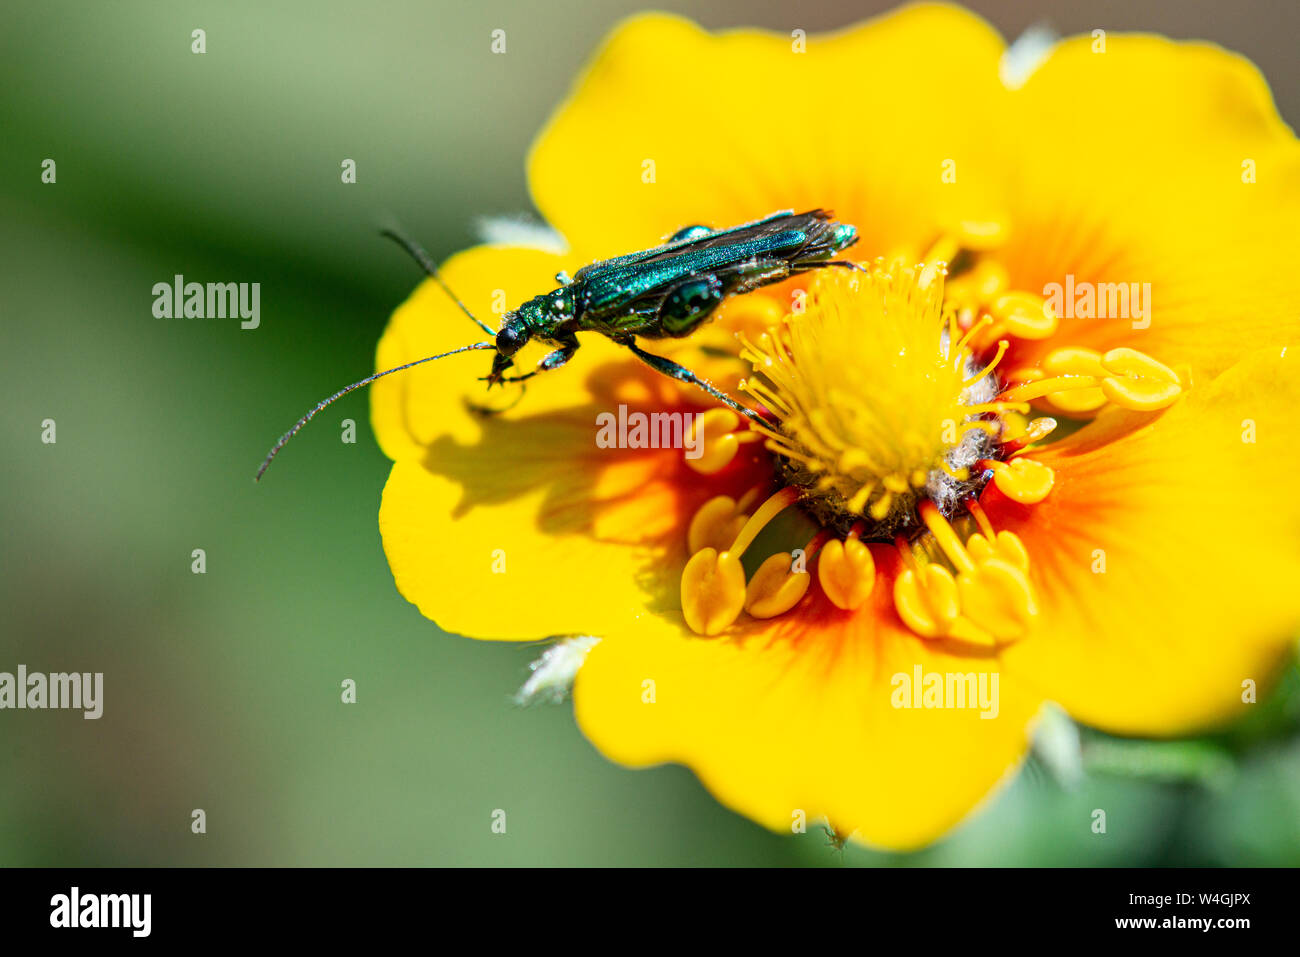 A swollen-thighed beetle (Oedemera nobilis) on the flower of a staghorn cinquefoil (Potentilla × tonguei) Stock Photo